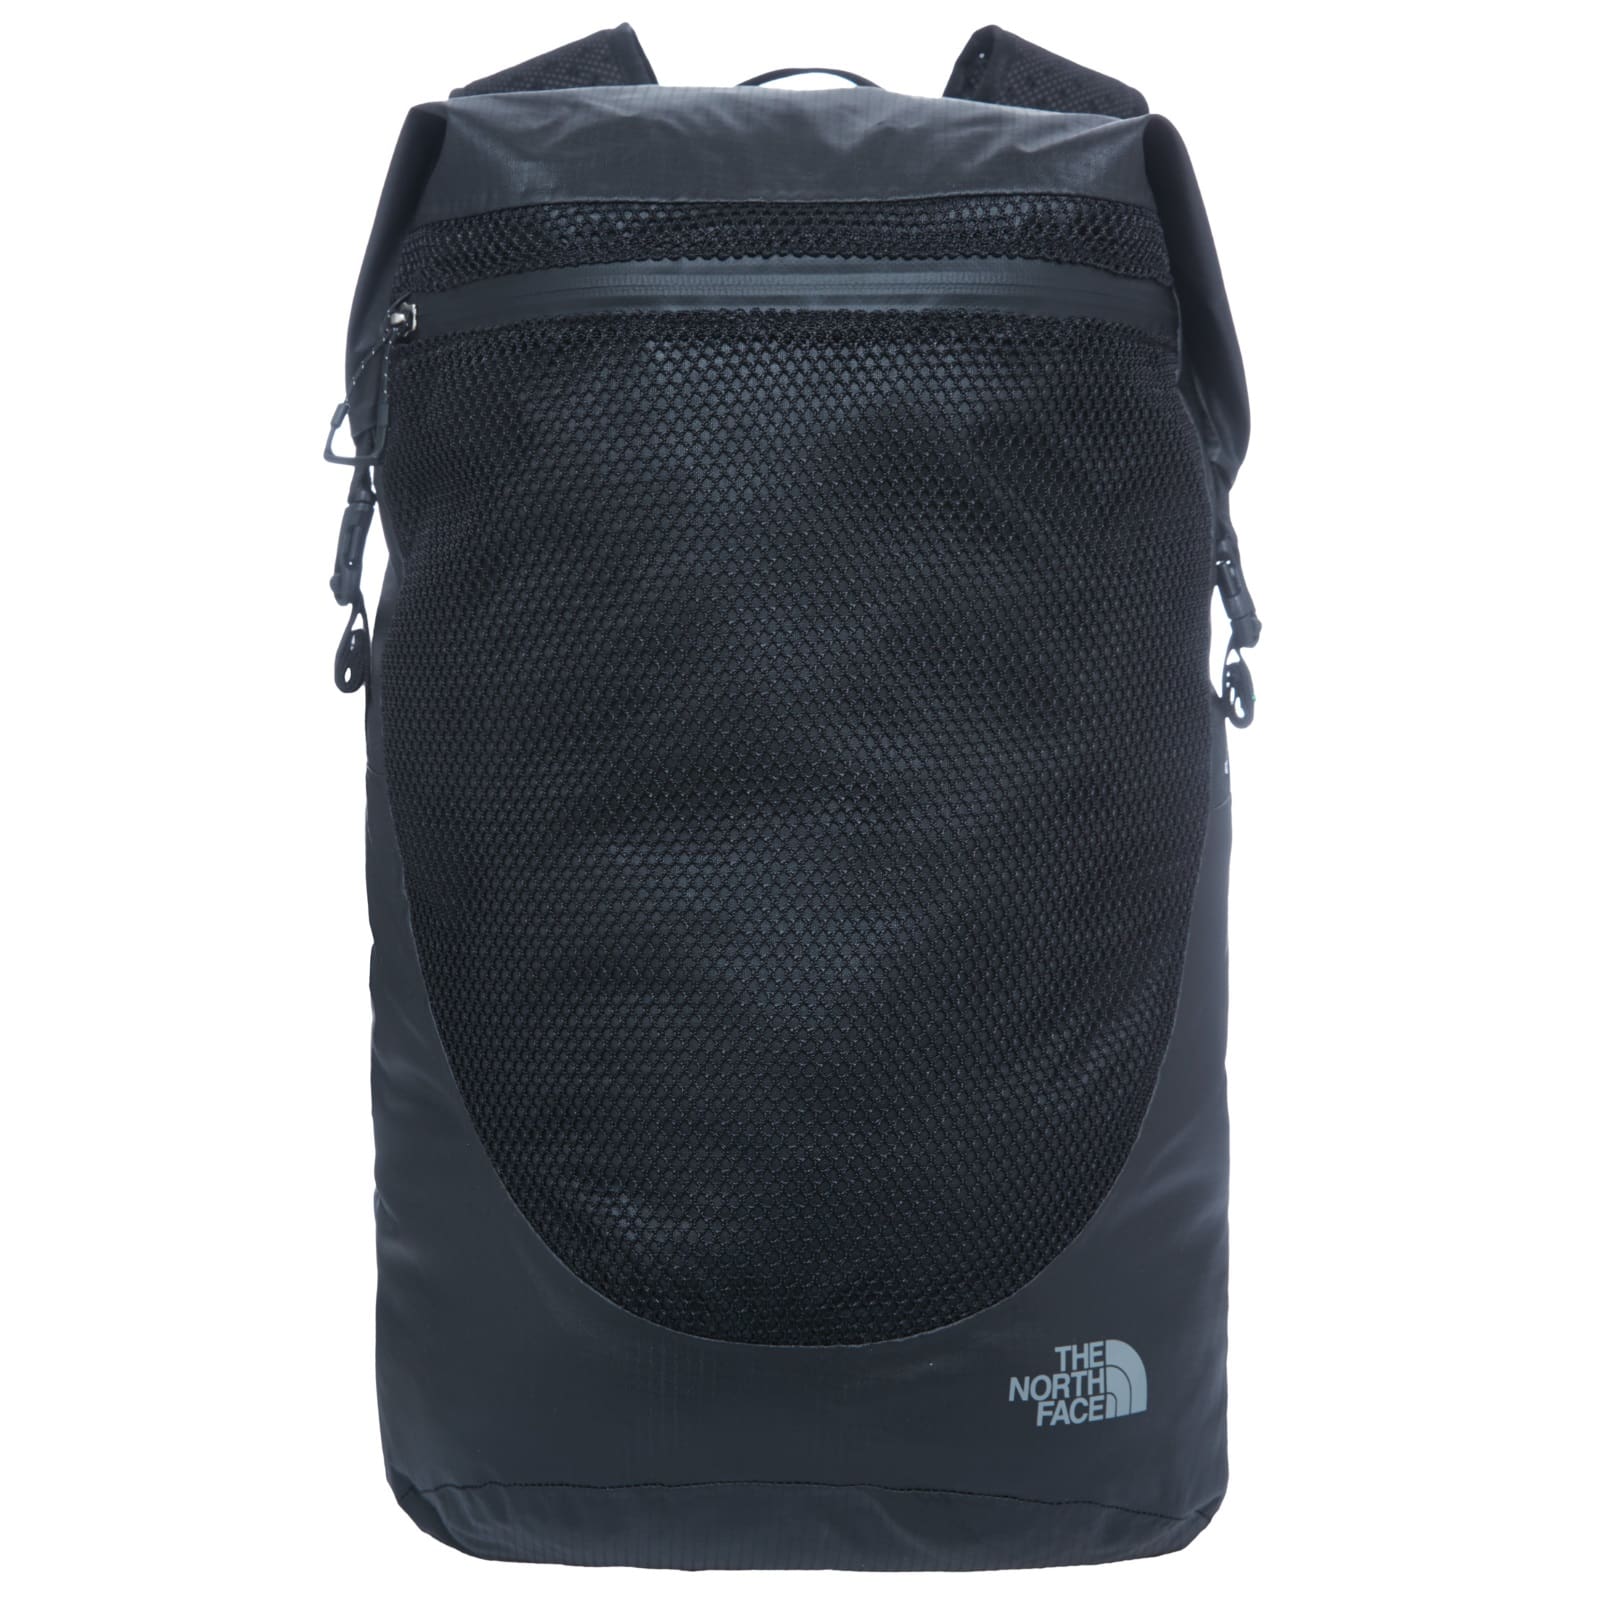 North Face Waterproof Daypack from Outnorth